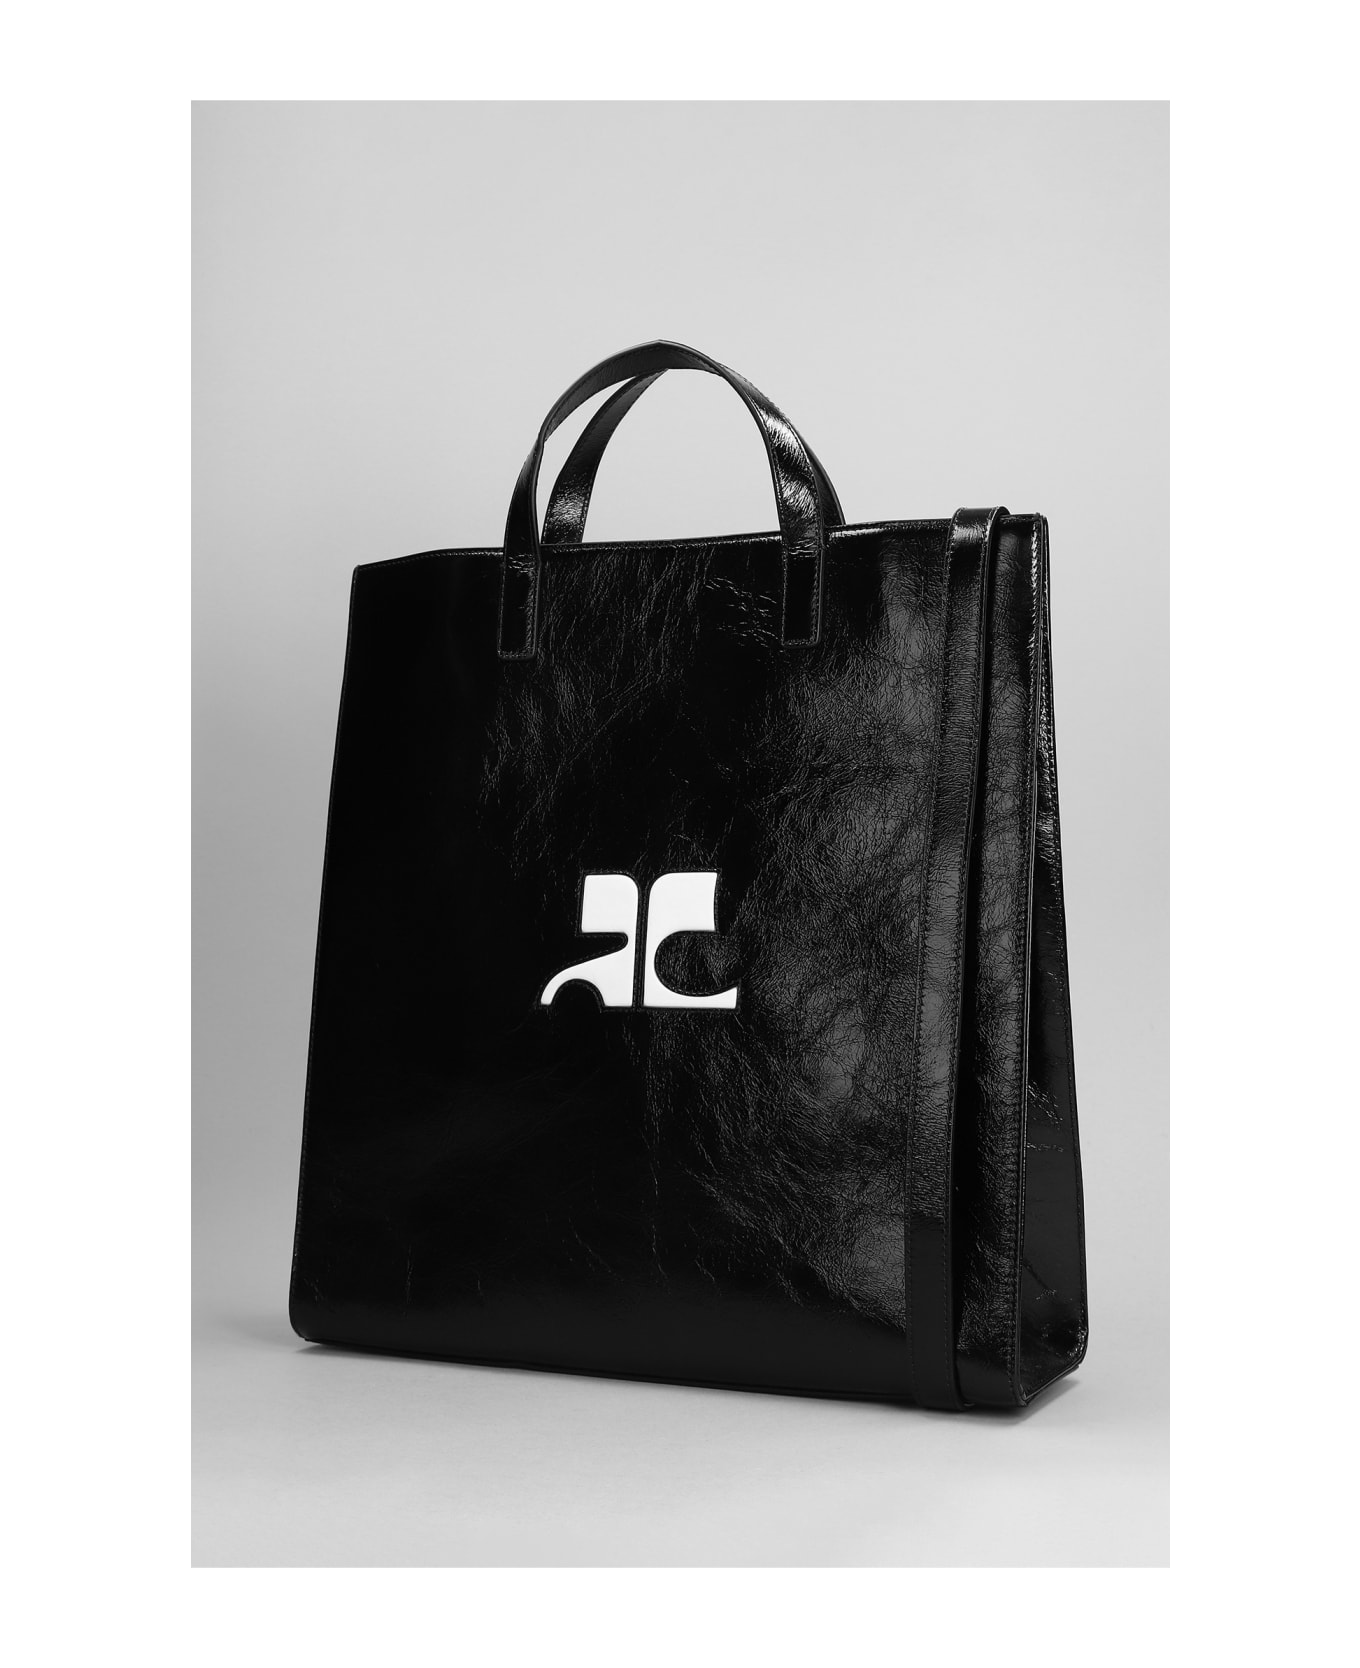 Courrèges Tote In Black Patent Leather - black トートバッグ